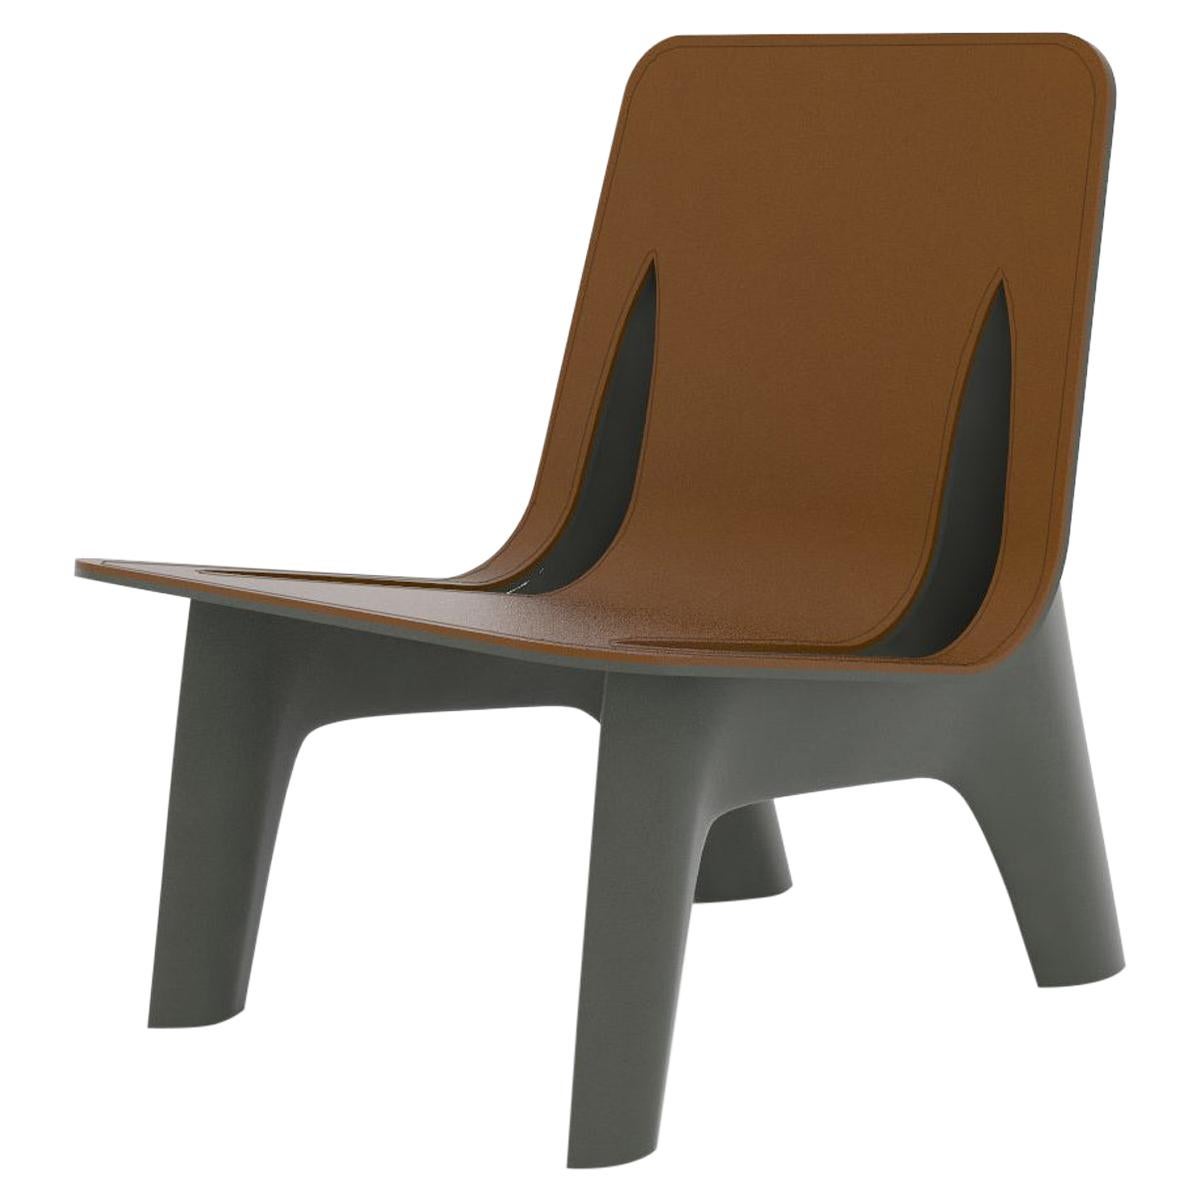 J-Chair Lounge Polished Umbra Grey Color Carbon Steel and Leather Seating, Zieta